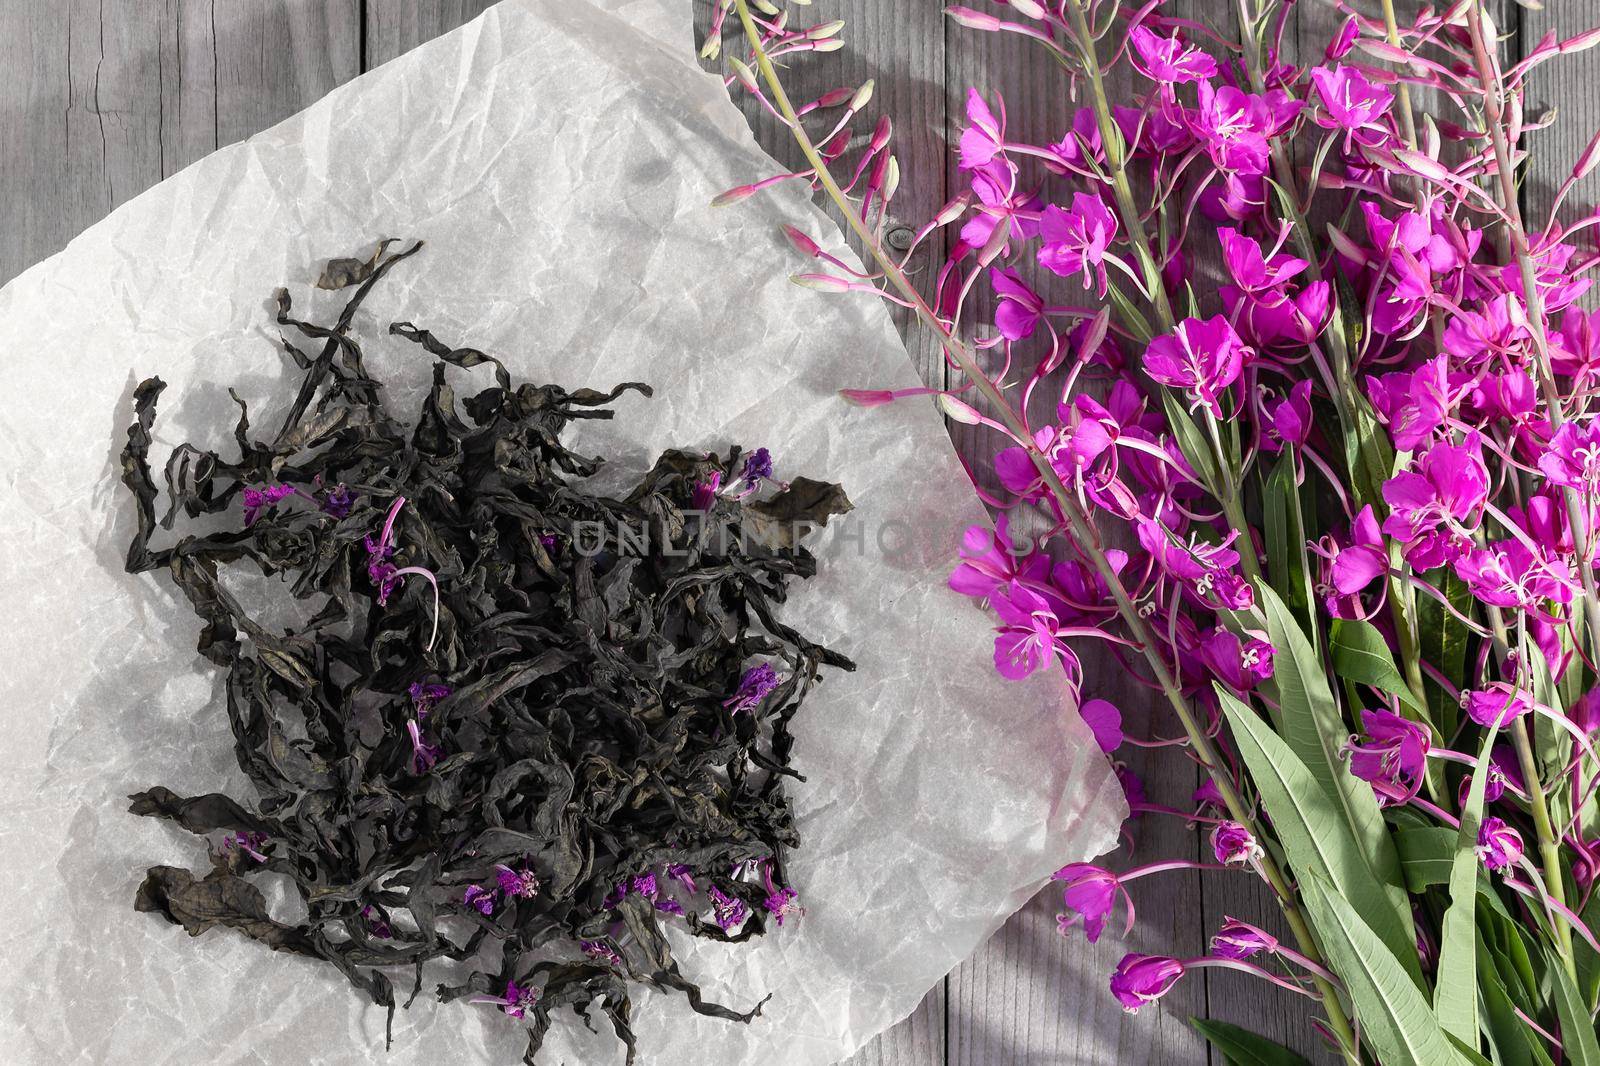 Herb is fireweed known as blooming sally and fermented dry tea.